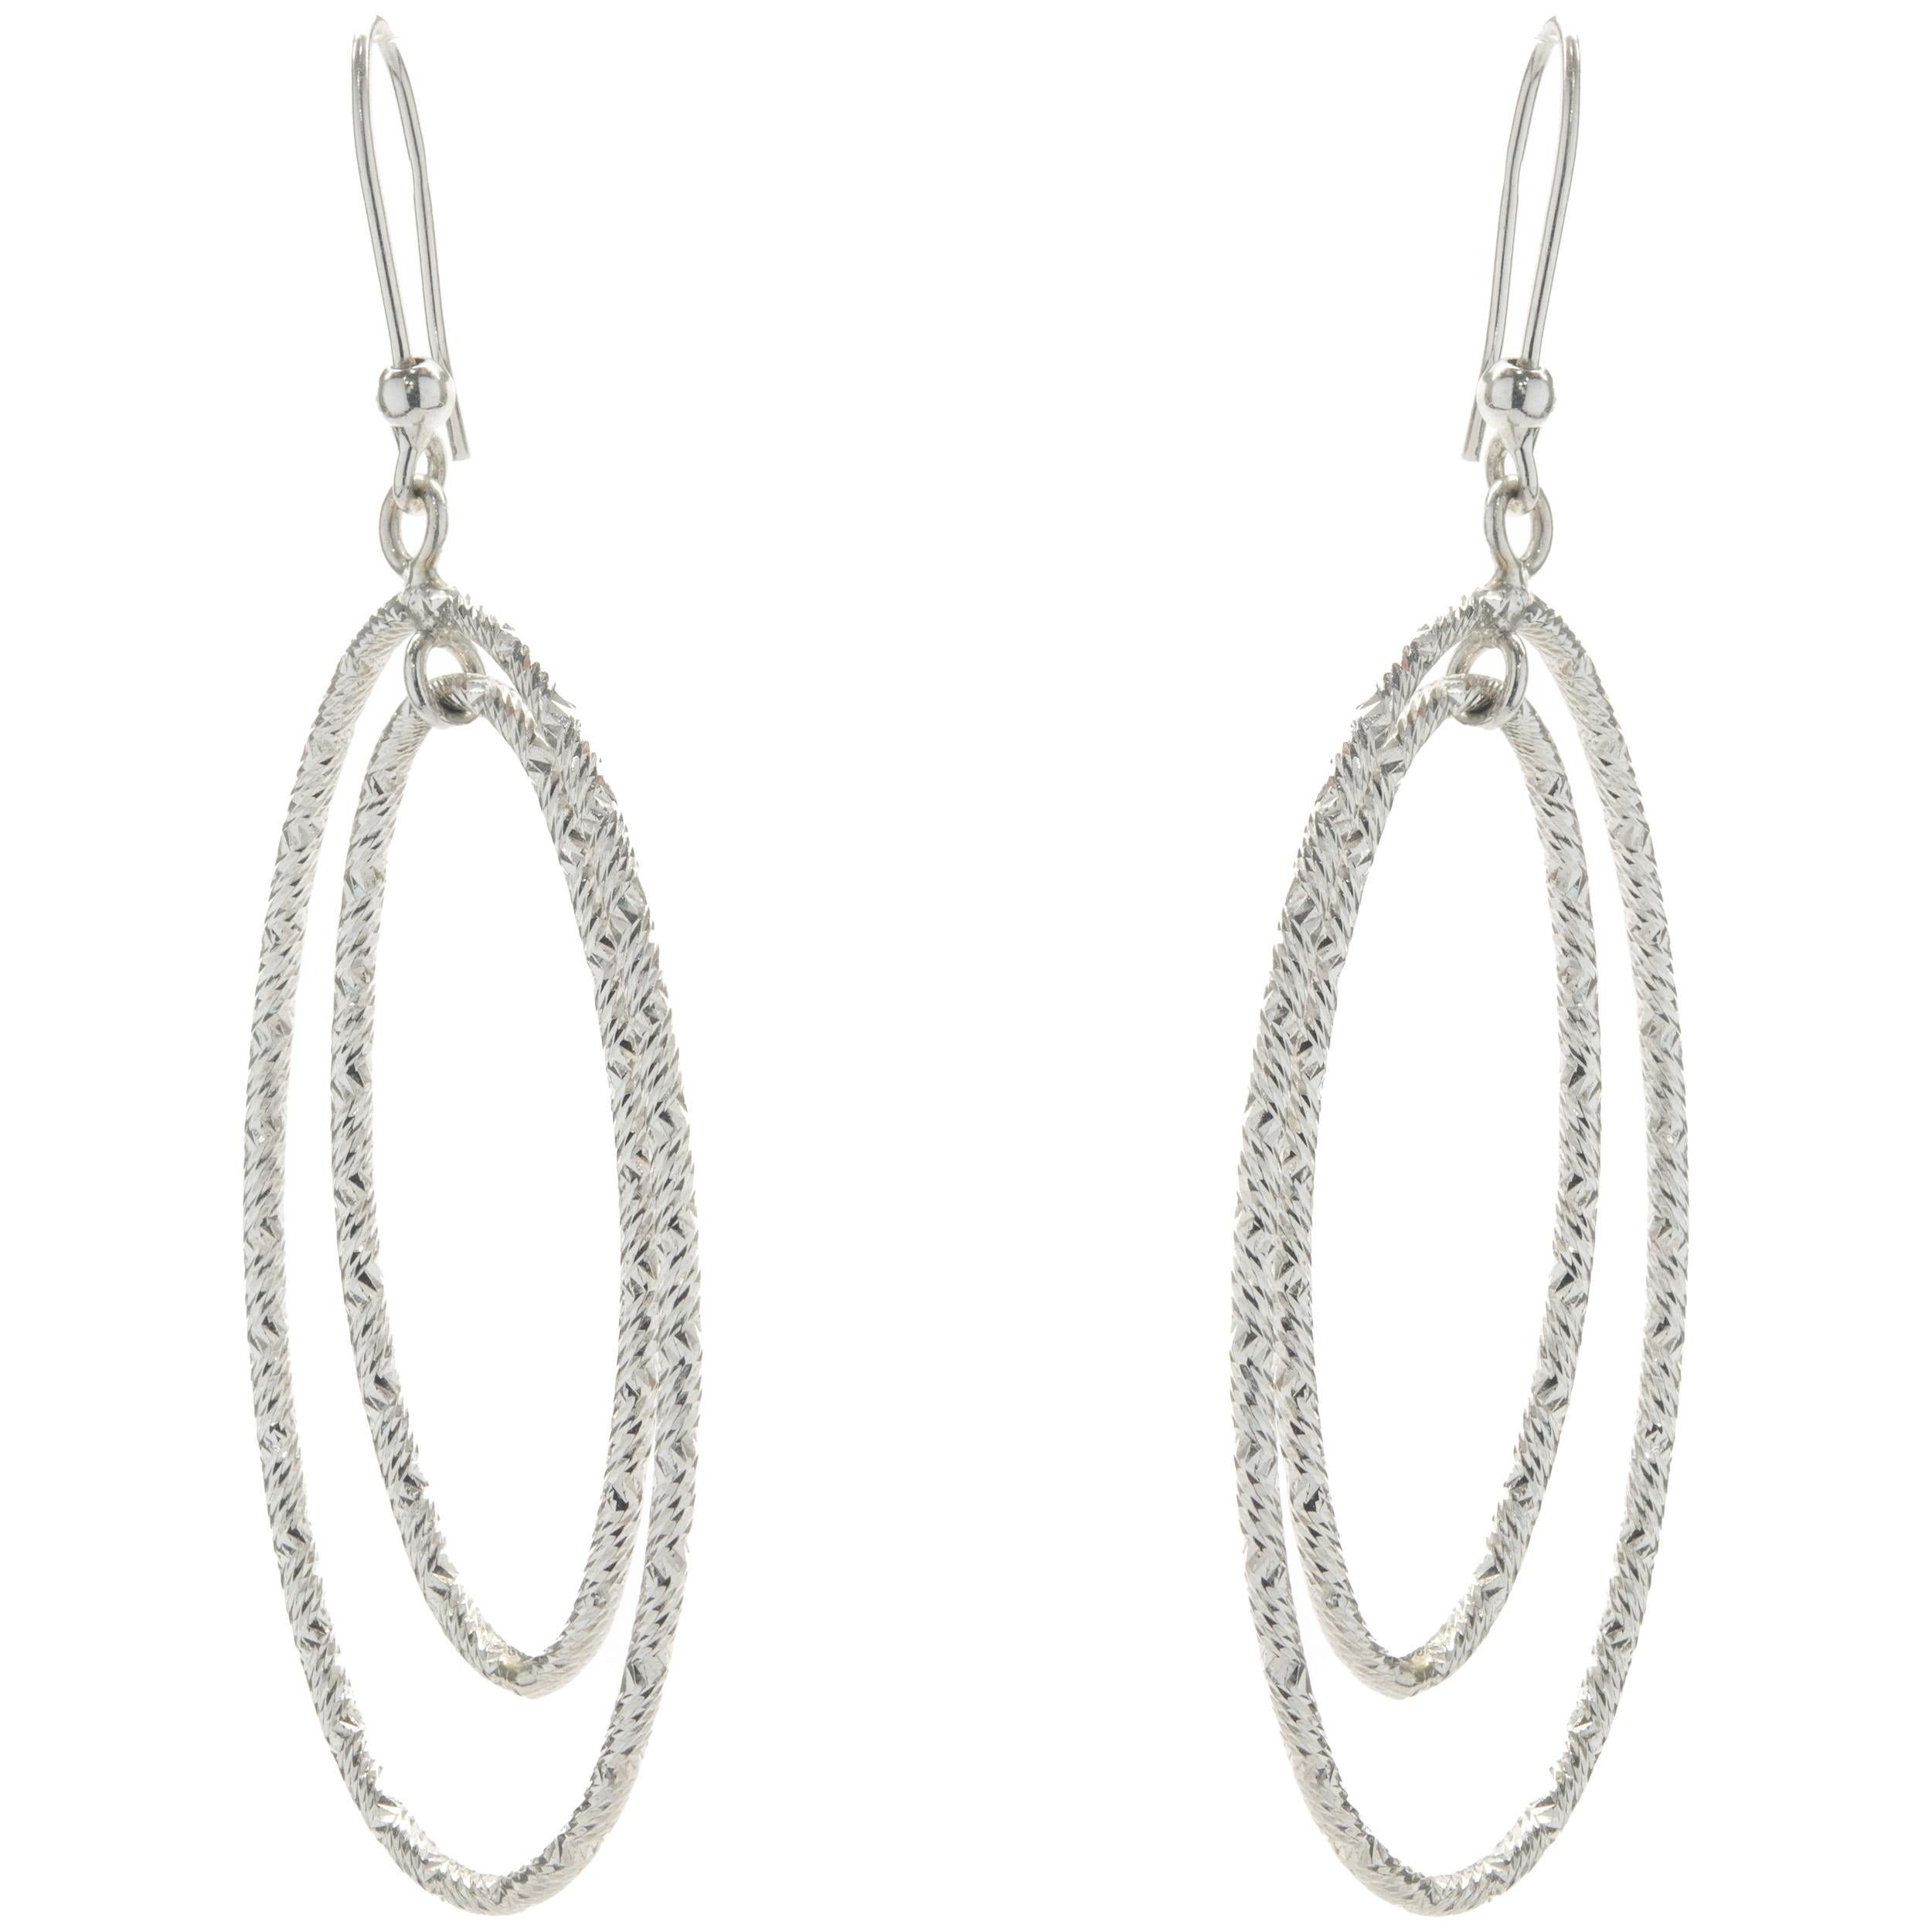 Material: 14K white gold
Dimensions: earrings measure 62mm 
Weight: 3.94 grams